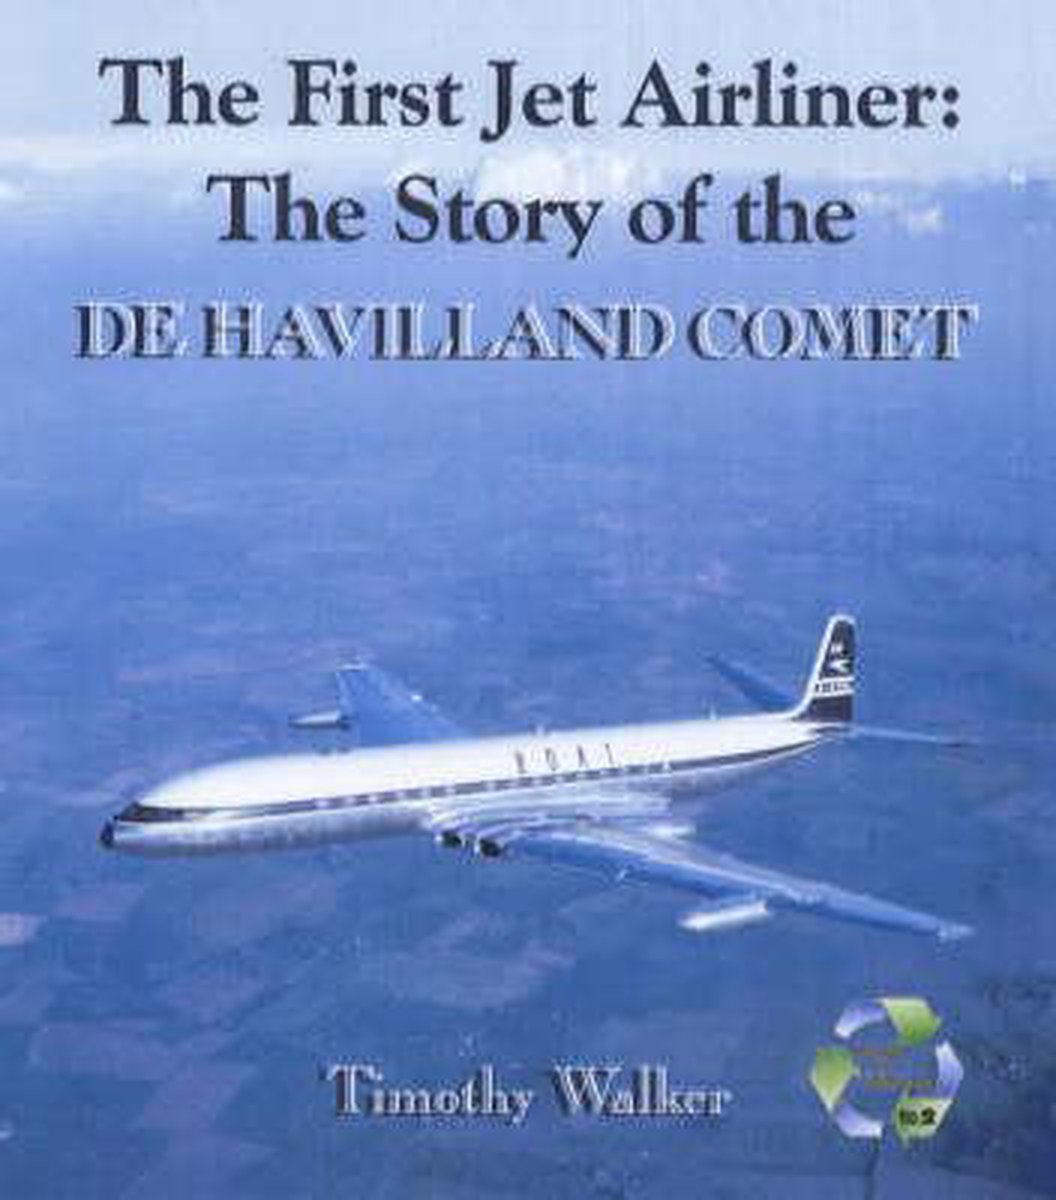 The First Jet Airliner